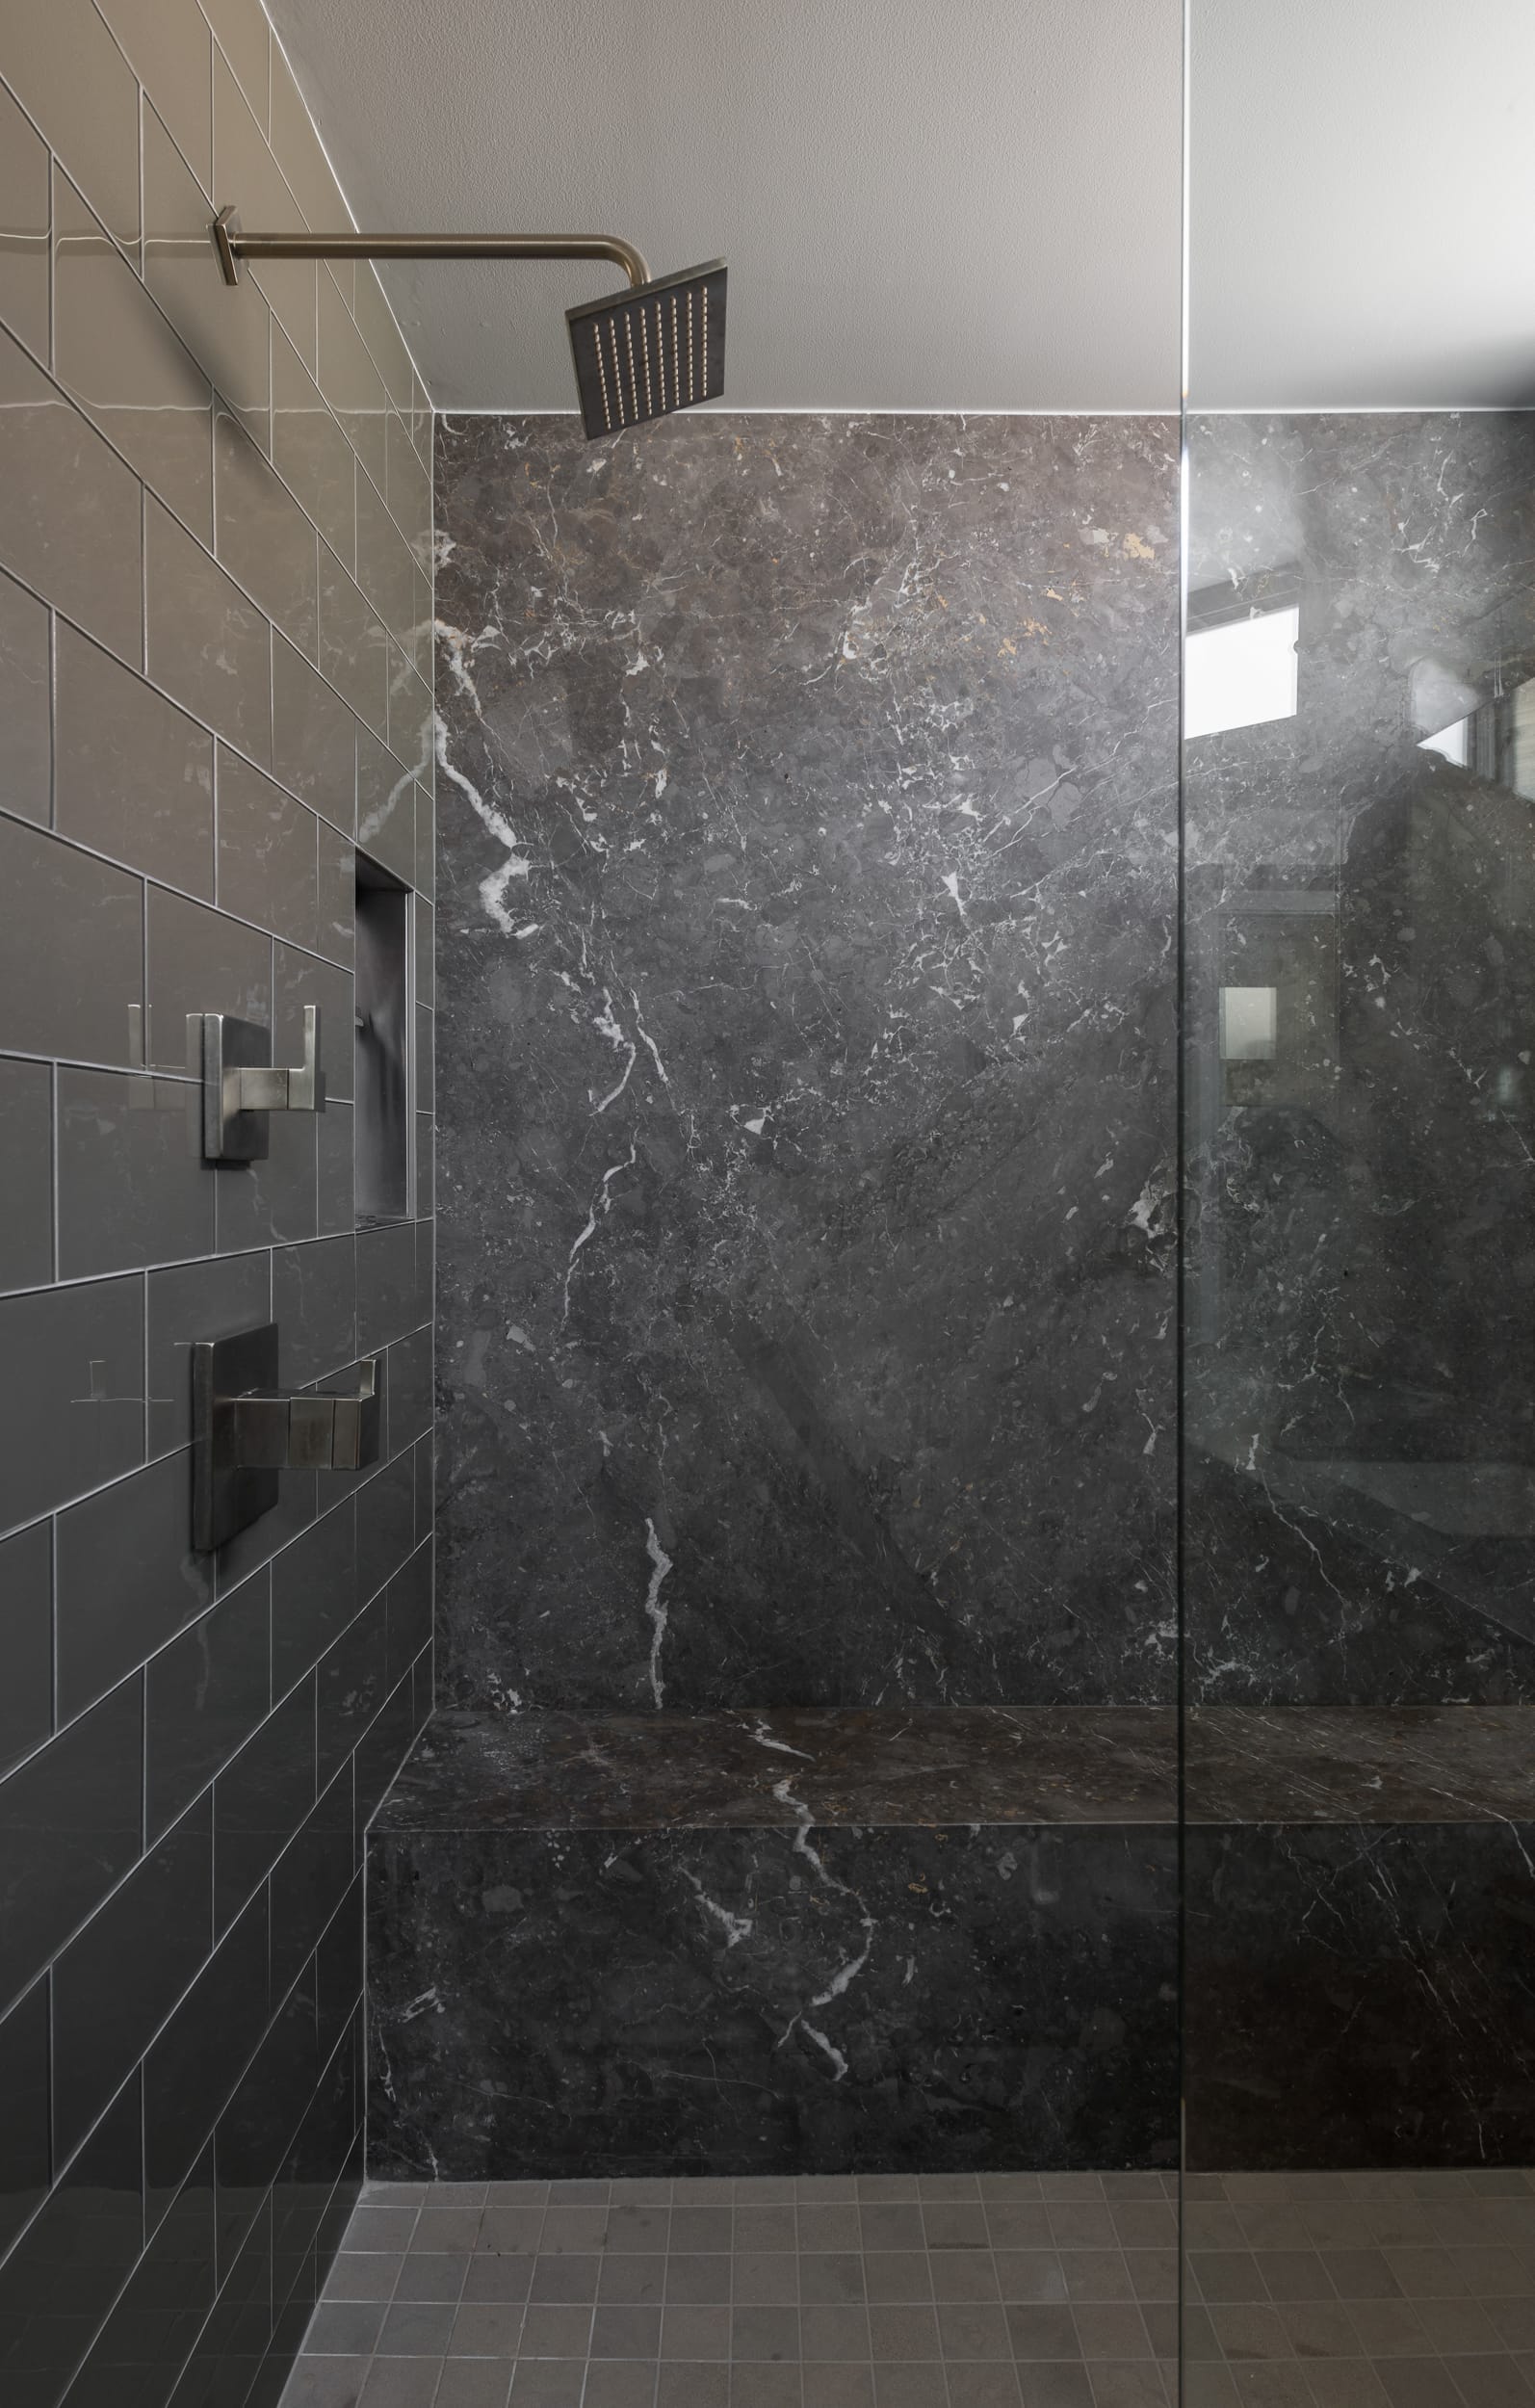 A modern bathroom with a glass shower stall and black marble walls.